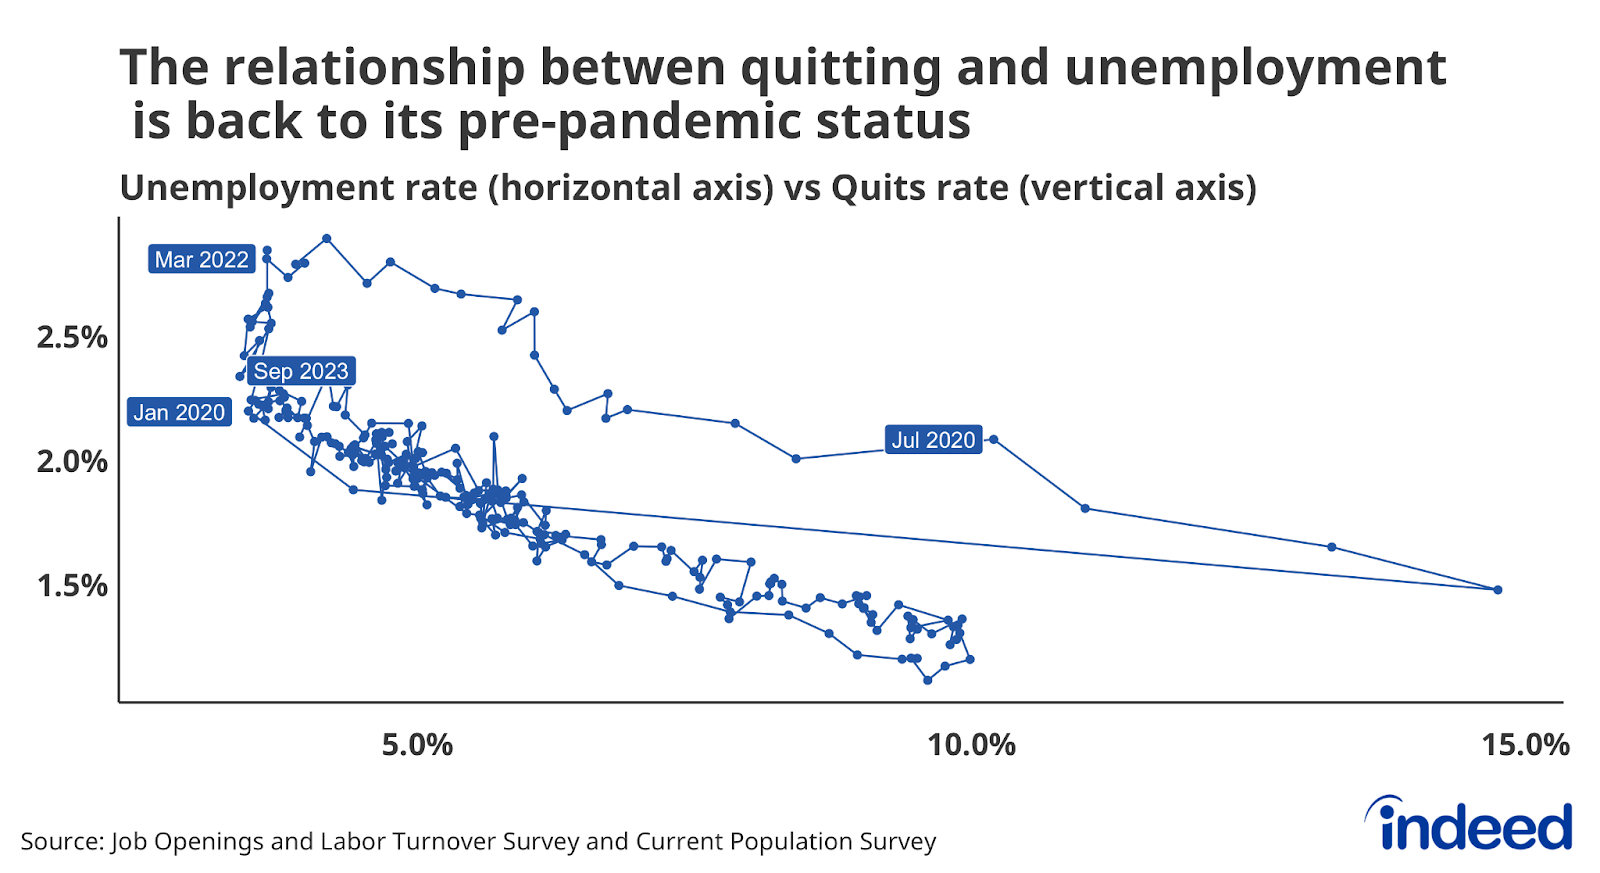 A graph titled “The relationship between quitting and unemployment is back to its pre-pandemic status” shows data on the unemployment rate and the quits rate.